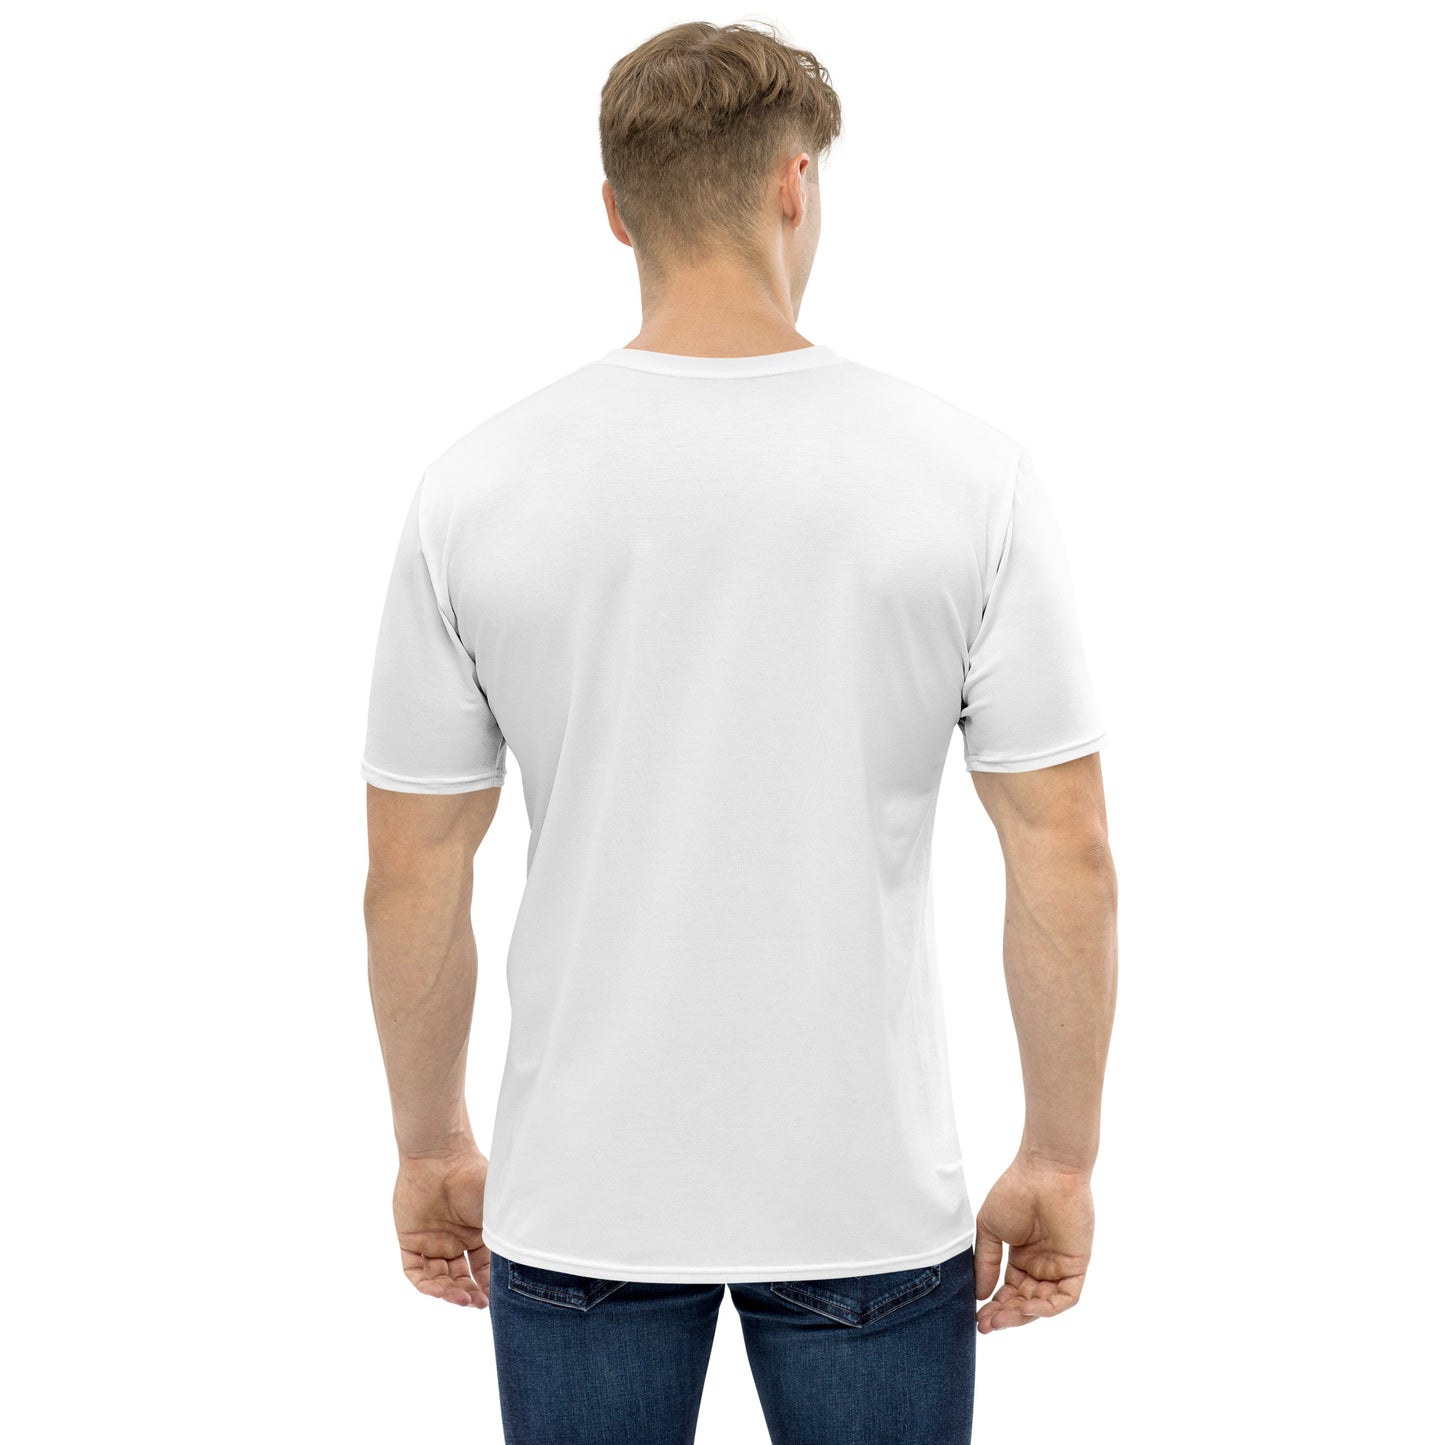 Tampa Warriors Solid White Men's Performance t-shirt